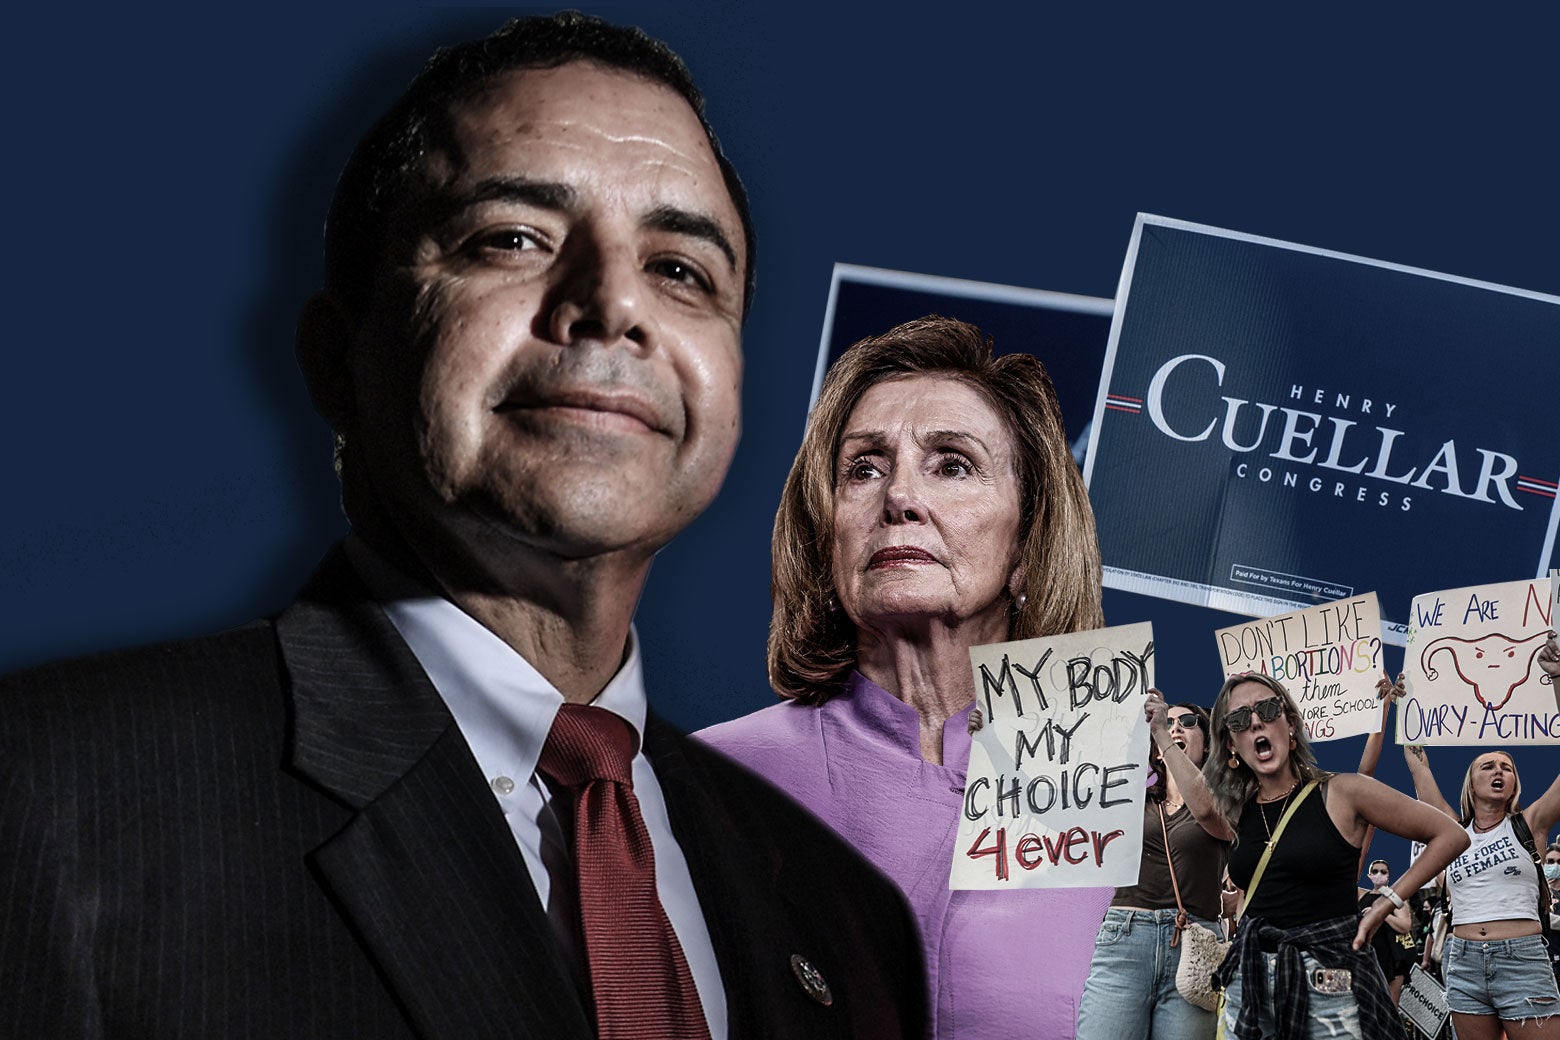 A collage of photos of Henry Cuellar, Nancy Pelosi, protesters, and pro-choice protest signs.